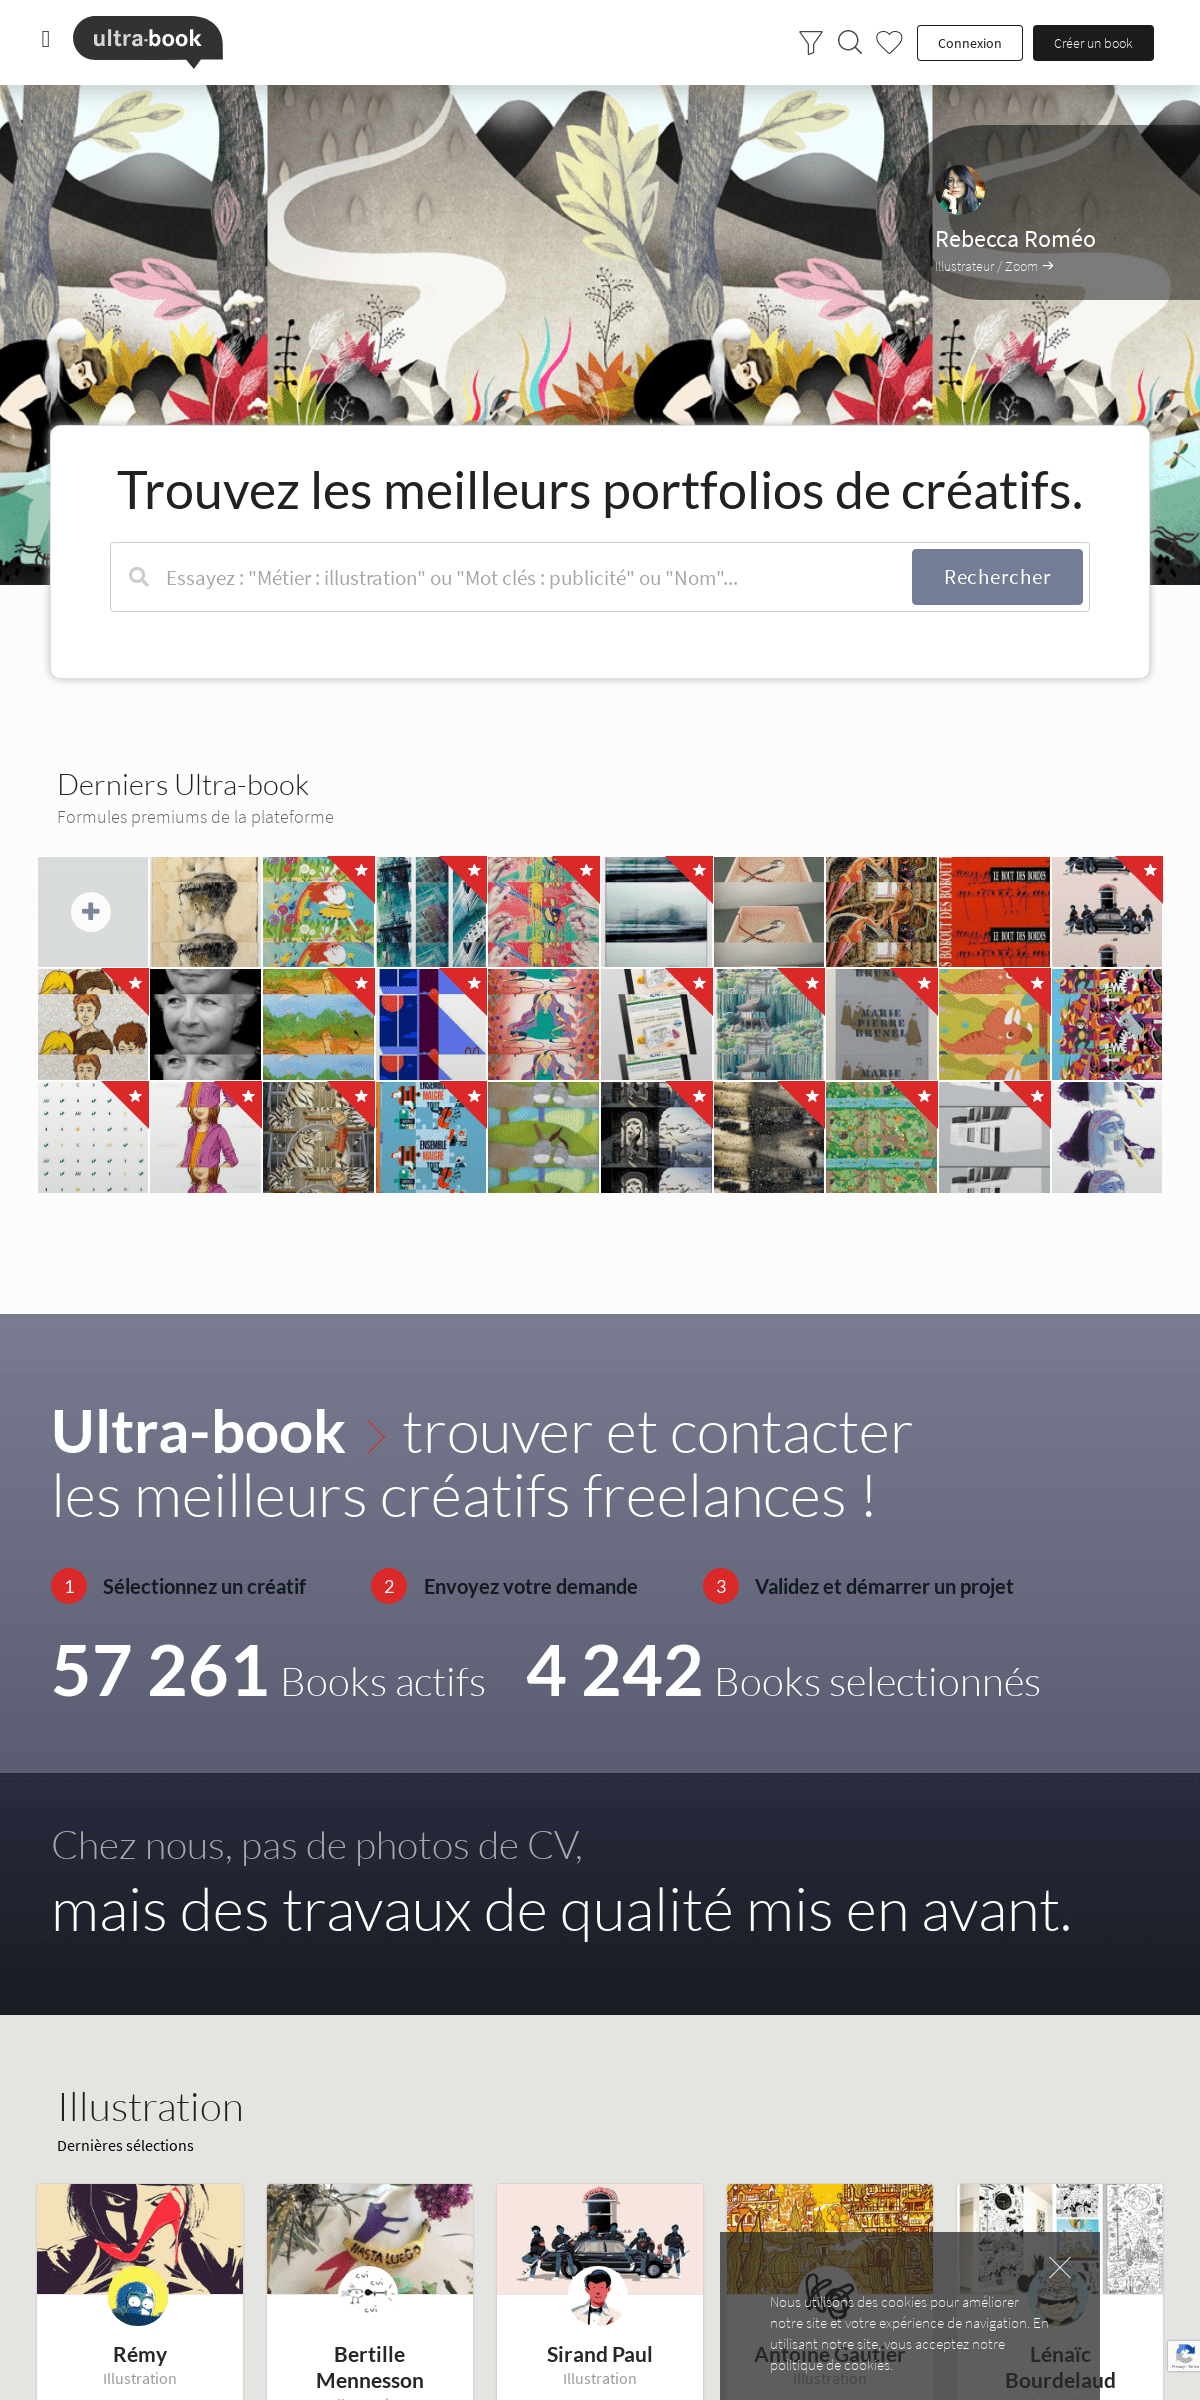 A complete backup of ultra-book.com